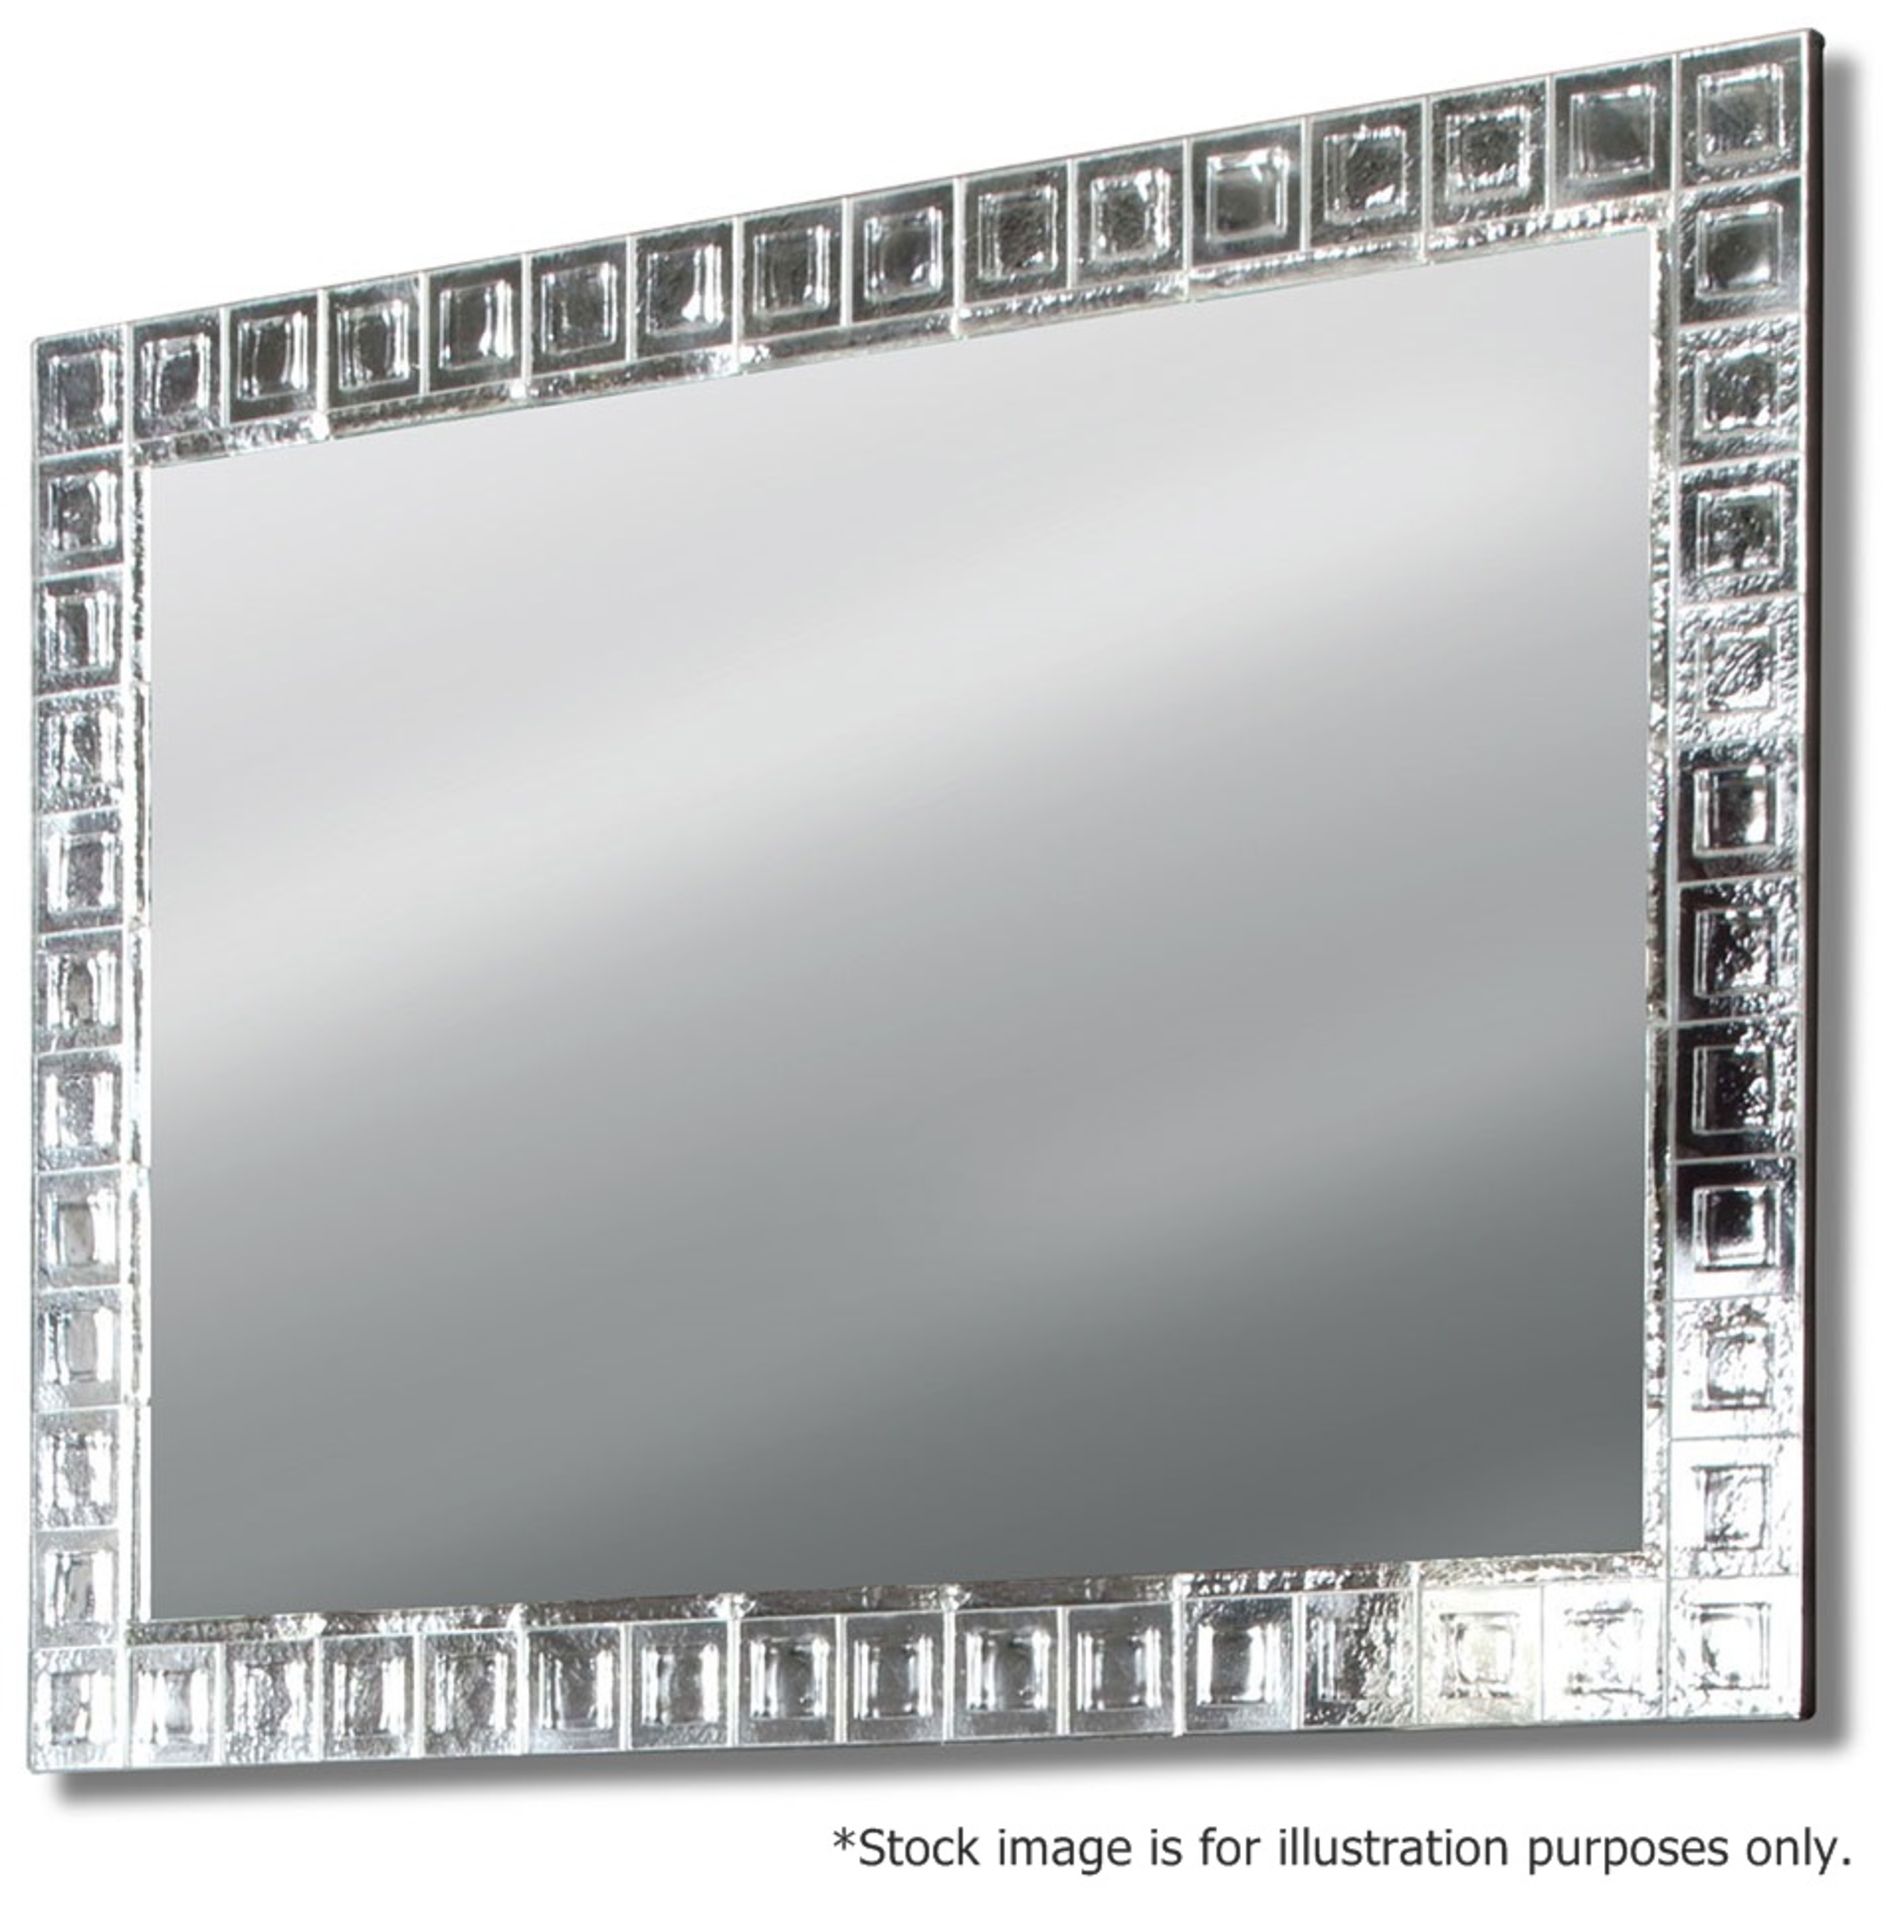 1 x GIORGIO COLLECTION 'Absolute' Luxury Italian Mirror With Murano Glass Frame - RRP £5,508 - Image 2 of 8